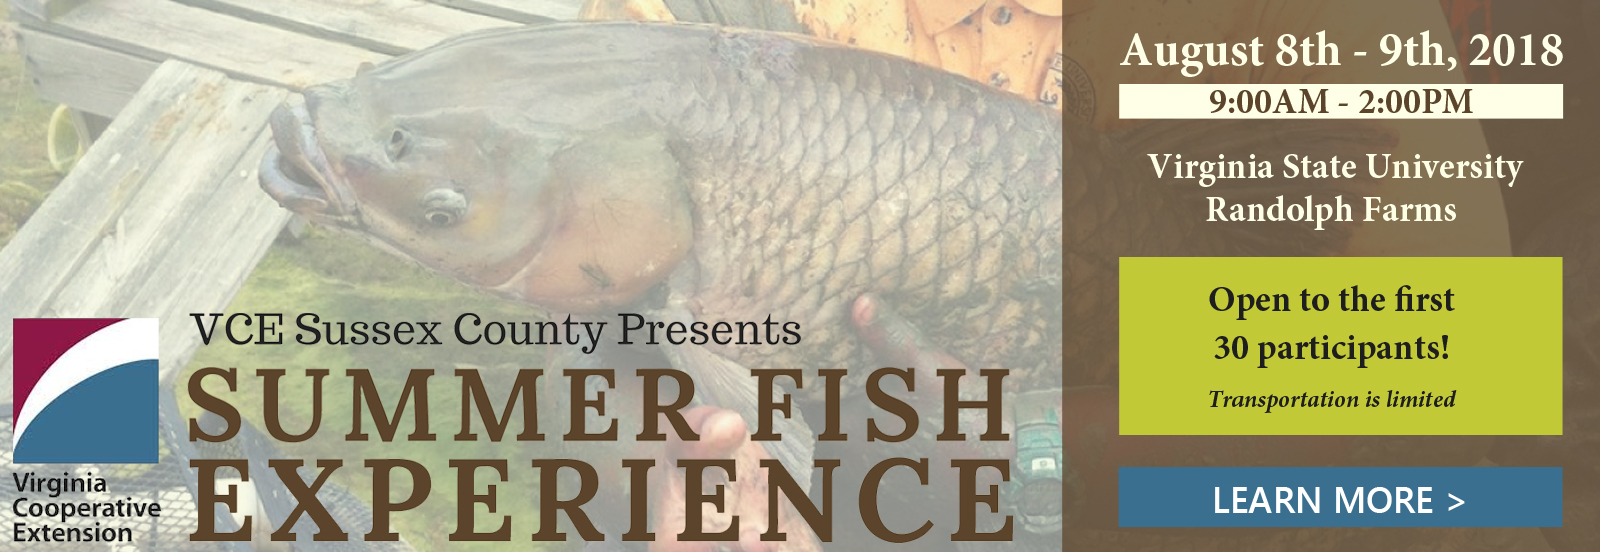 VCE Sussex County Presents Summer Fish Experience